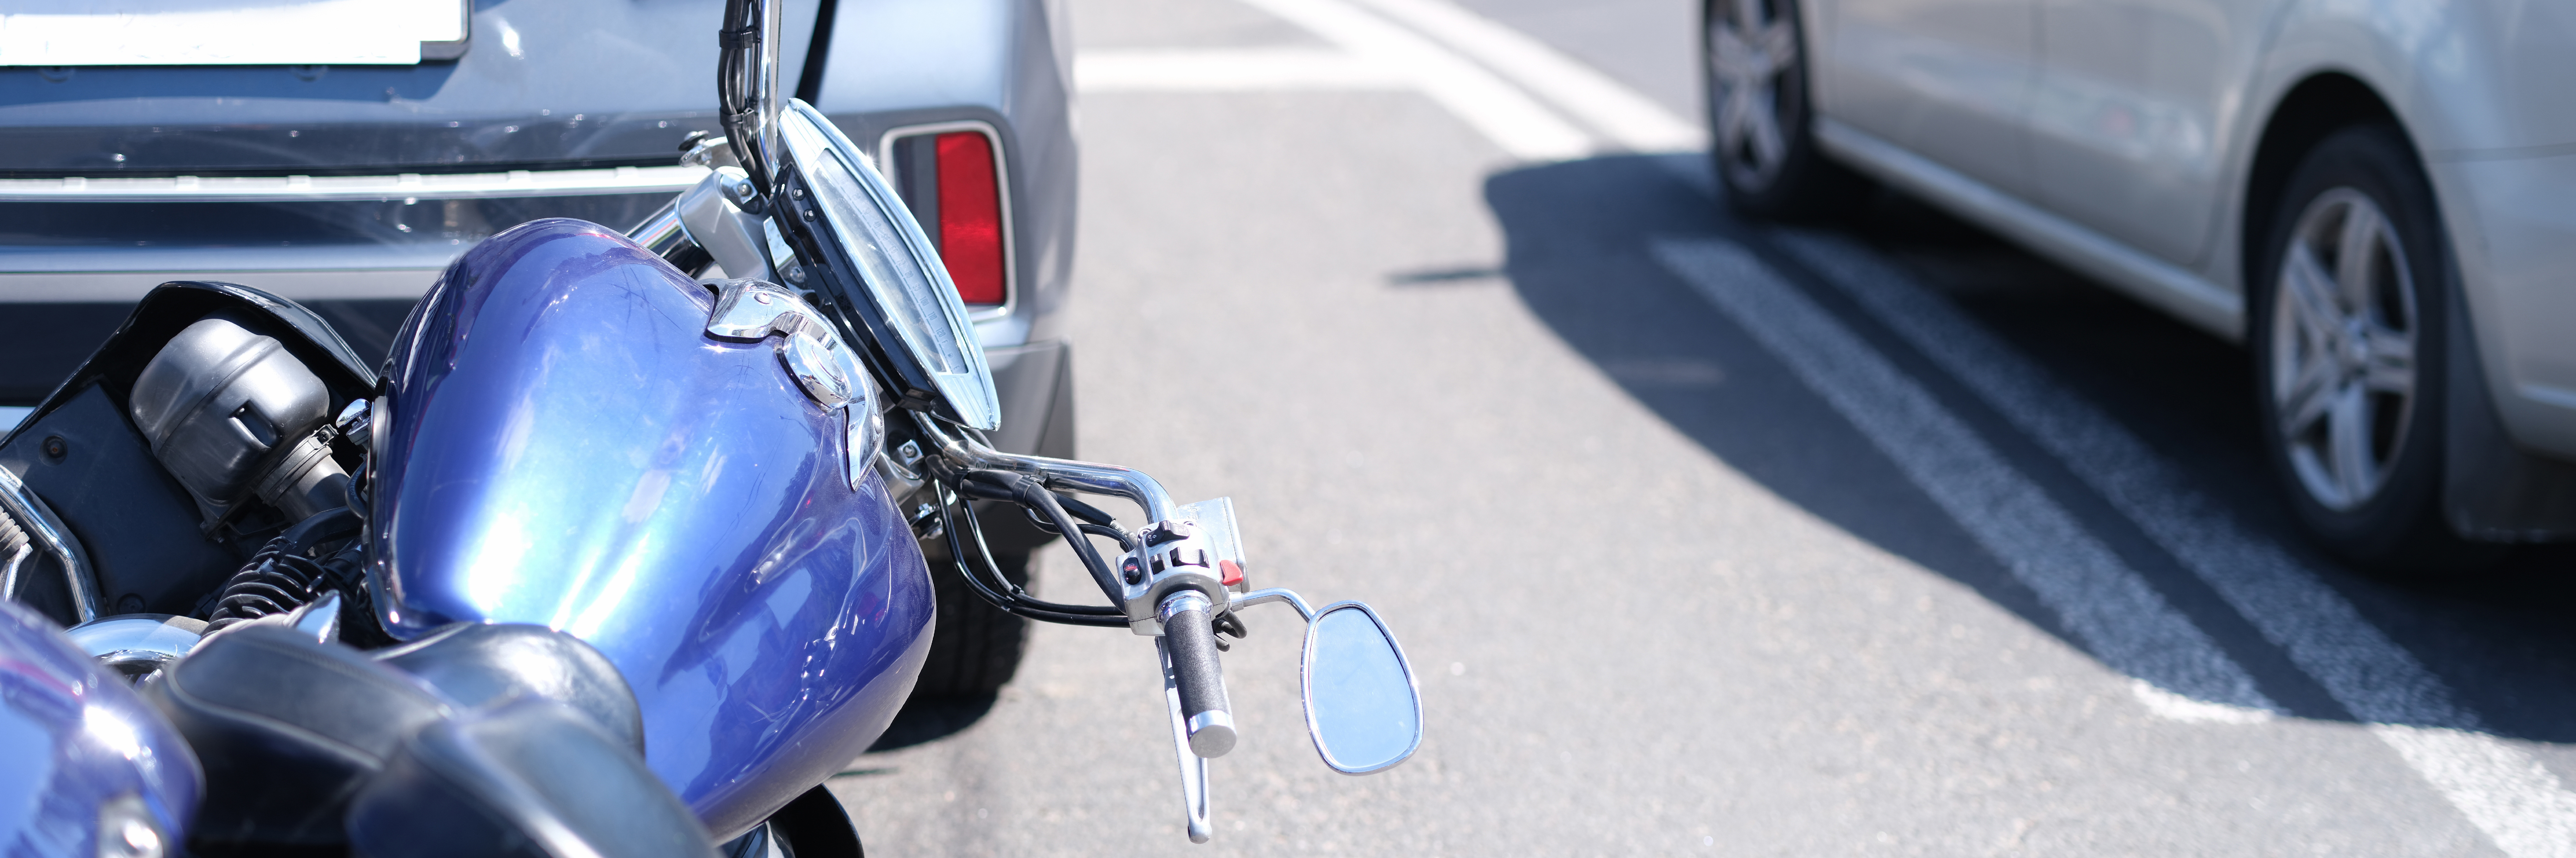 Is Full Coverage Motorcycle Insurance Required in Florida?